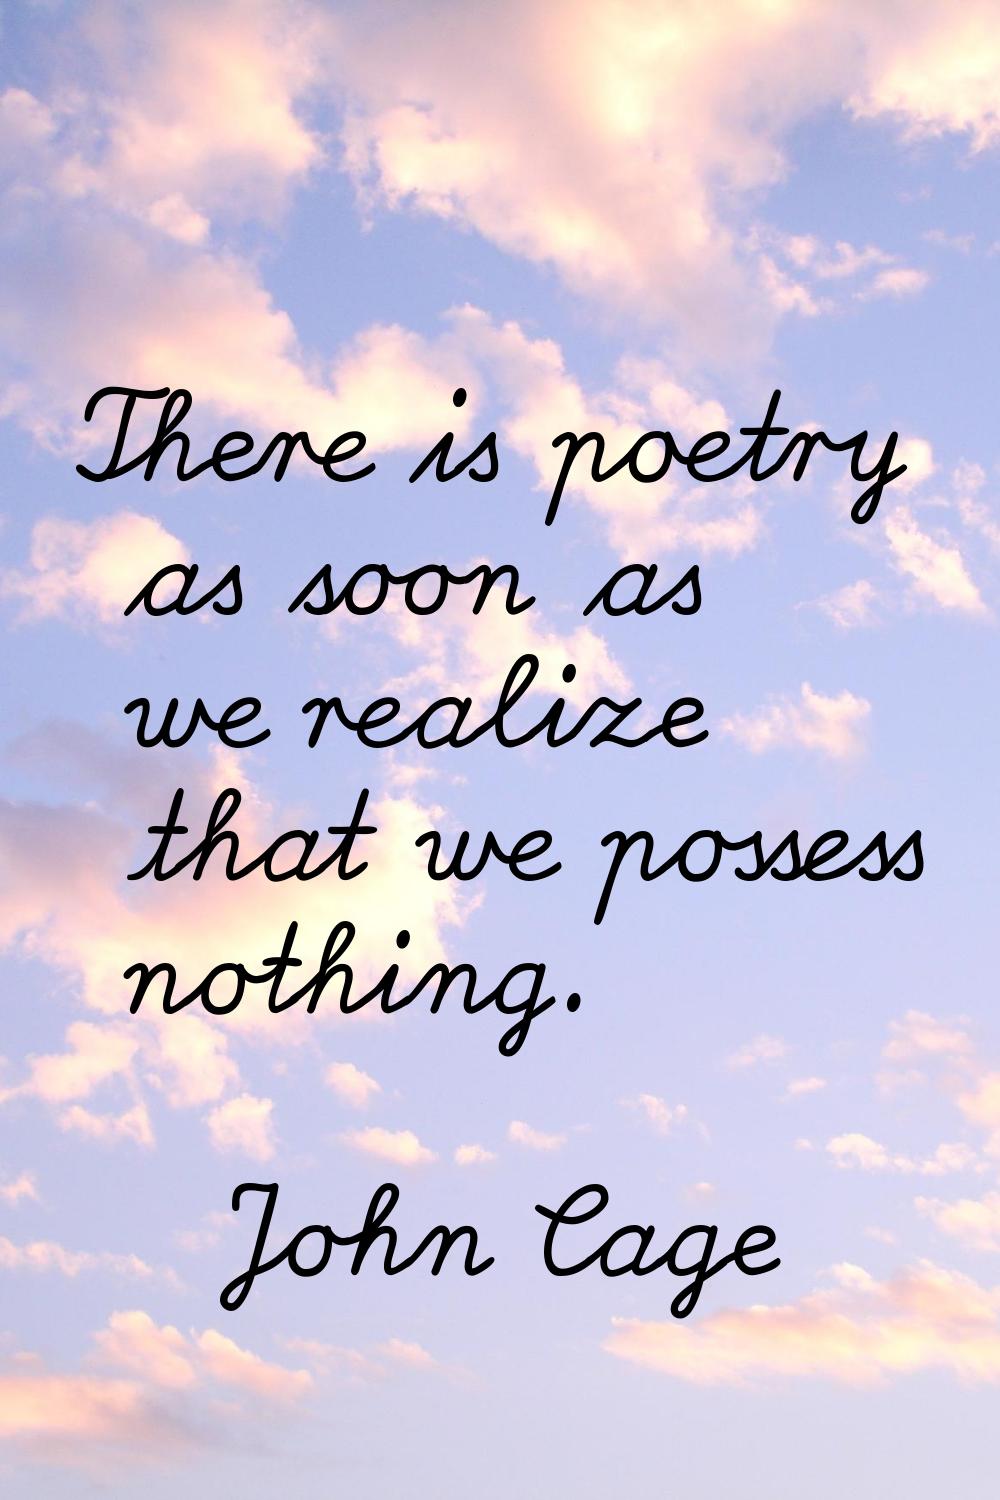 There is poetry as soon as we realize that we possess nothing.